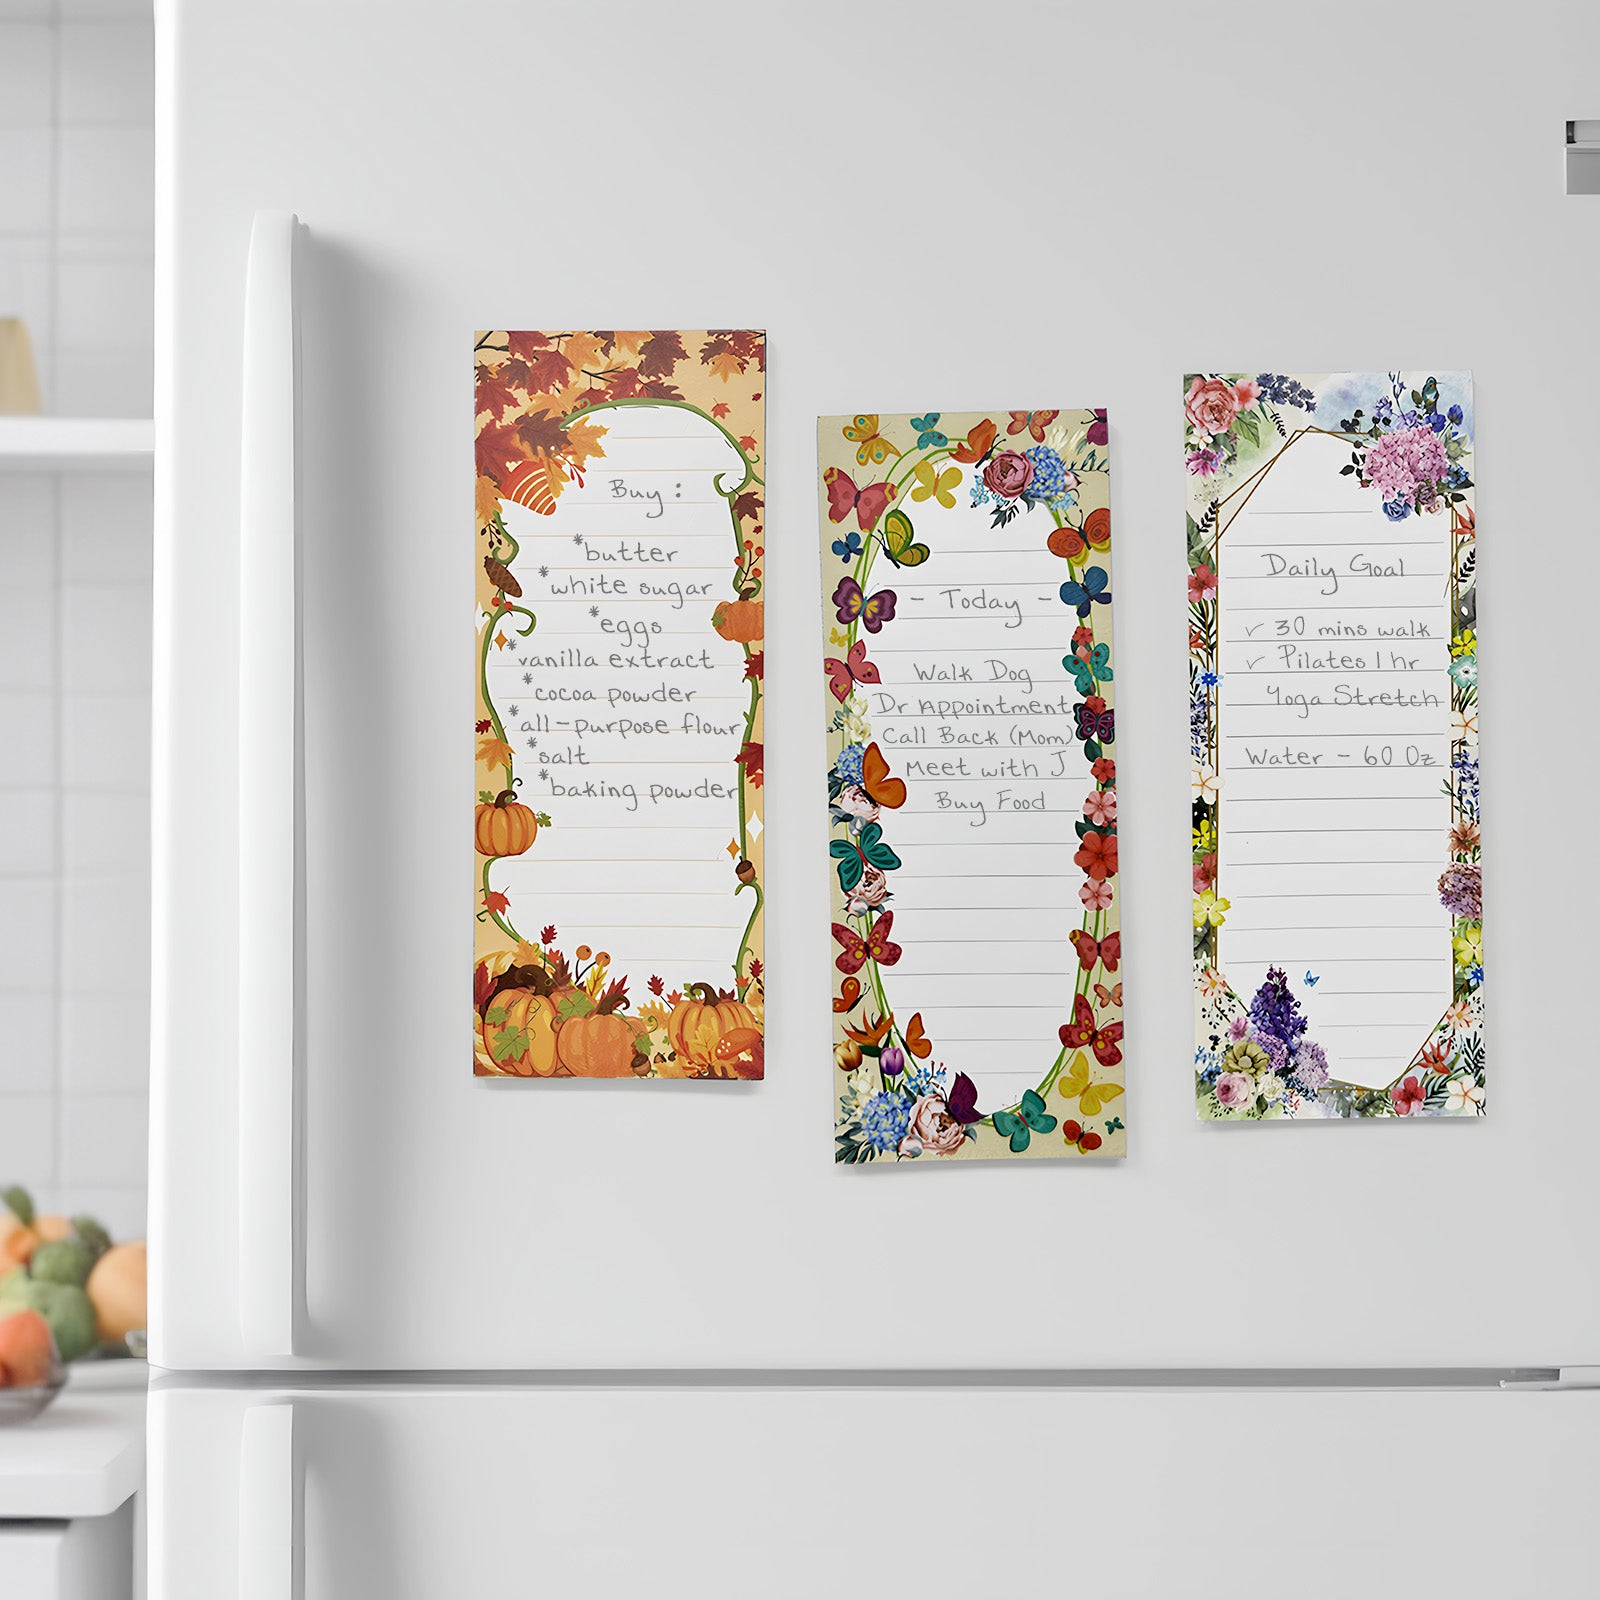 Wrapables Magnetic Notepads for Refrigerator, To-Do lists, Grocery Shopping, Memo, Reminders (Set of 3)